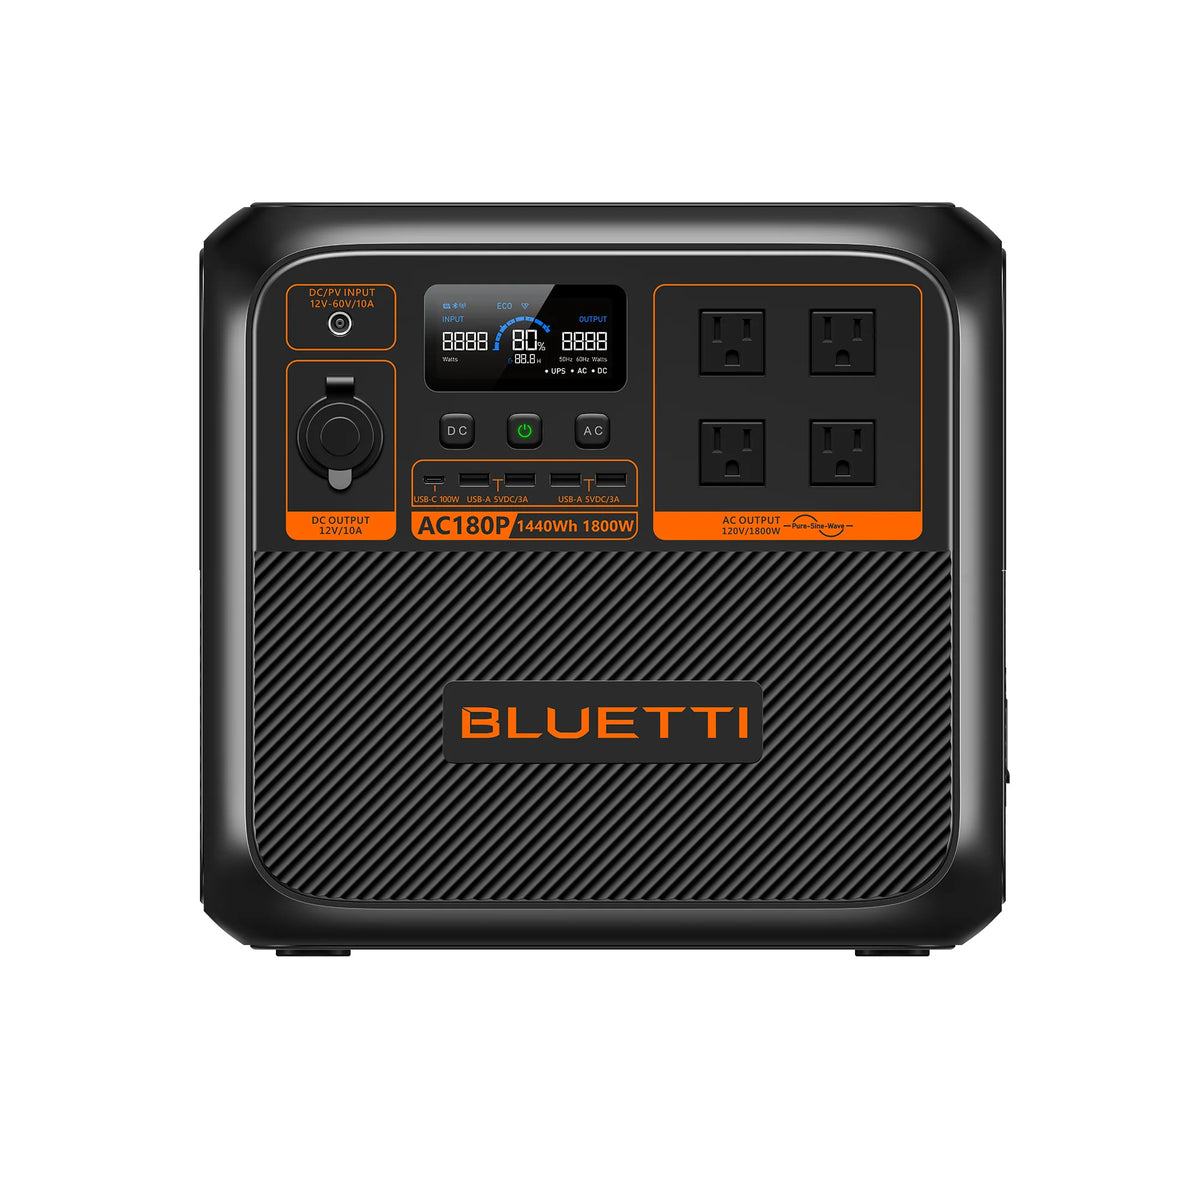 Bluetti AC180: New power station with all-round capabilities